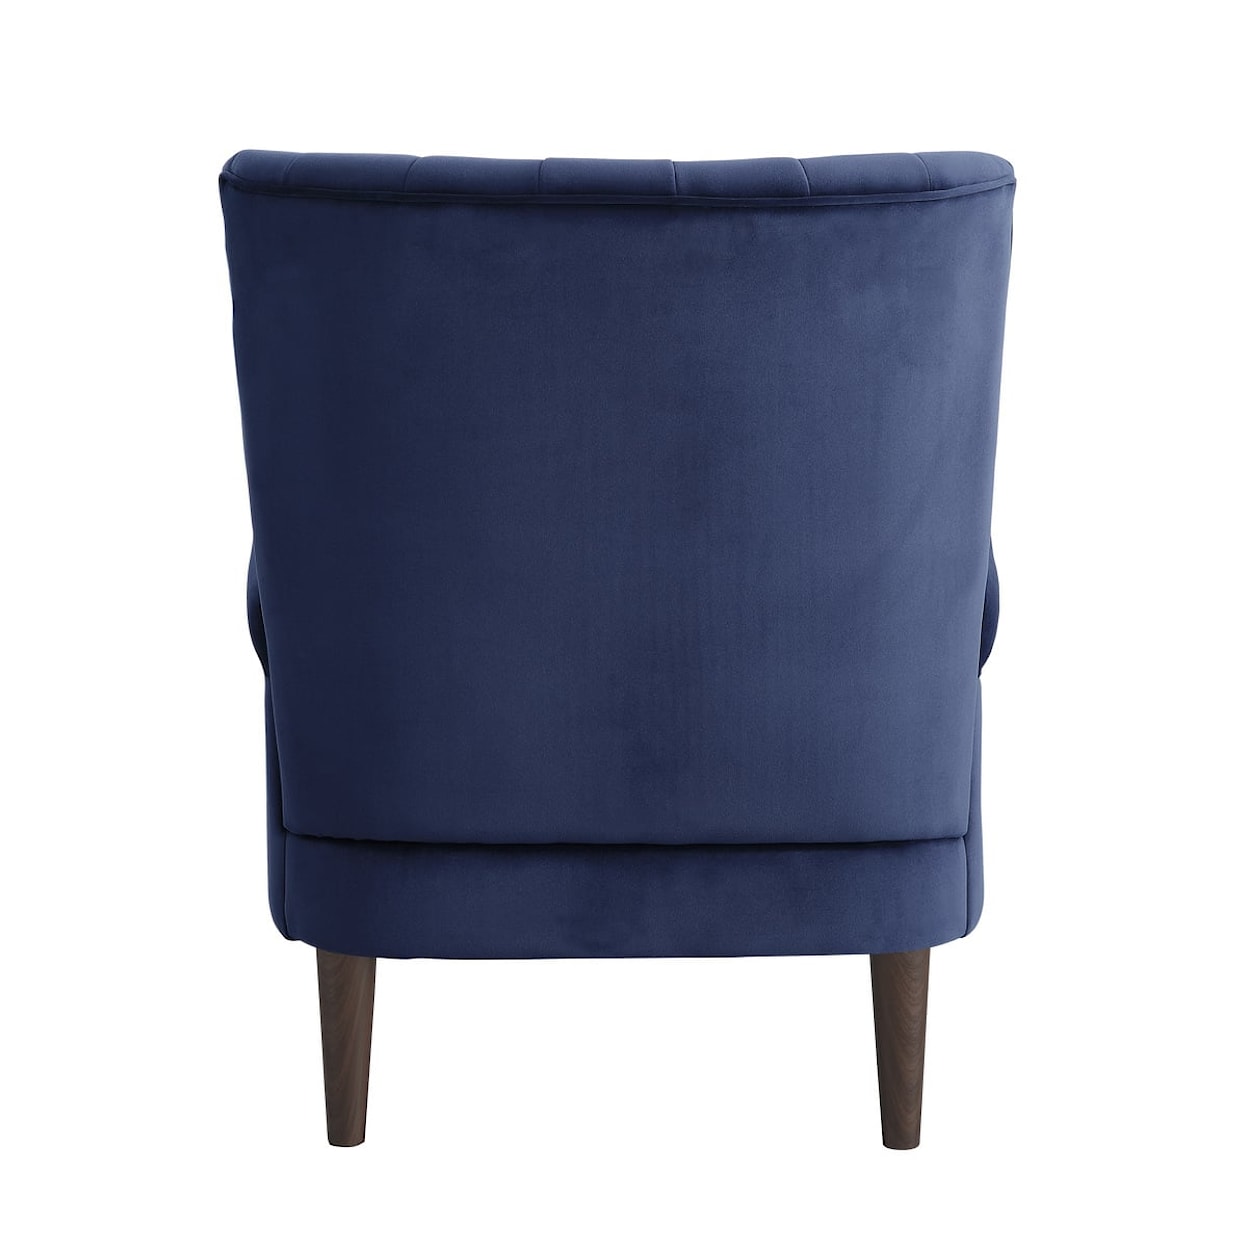 Homelegance Furniture Urielle Accent Chair